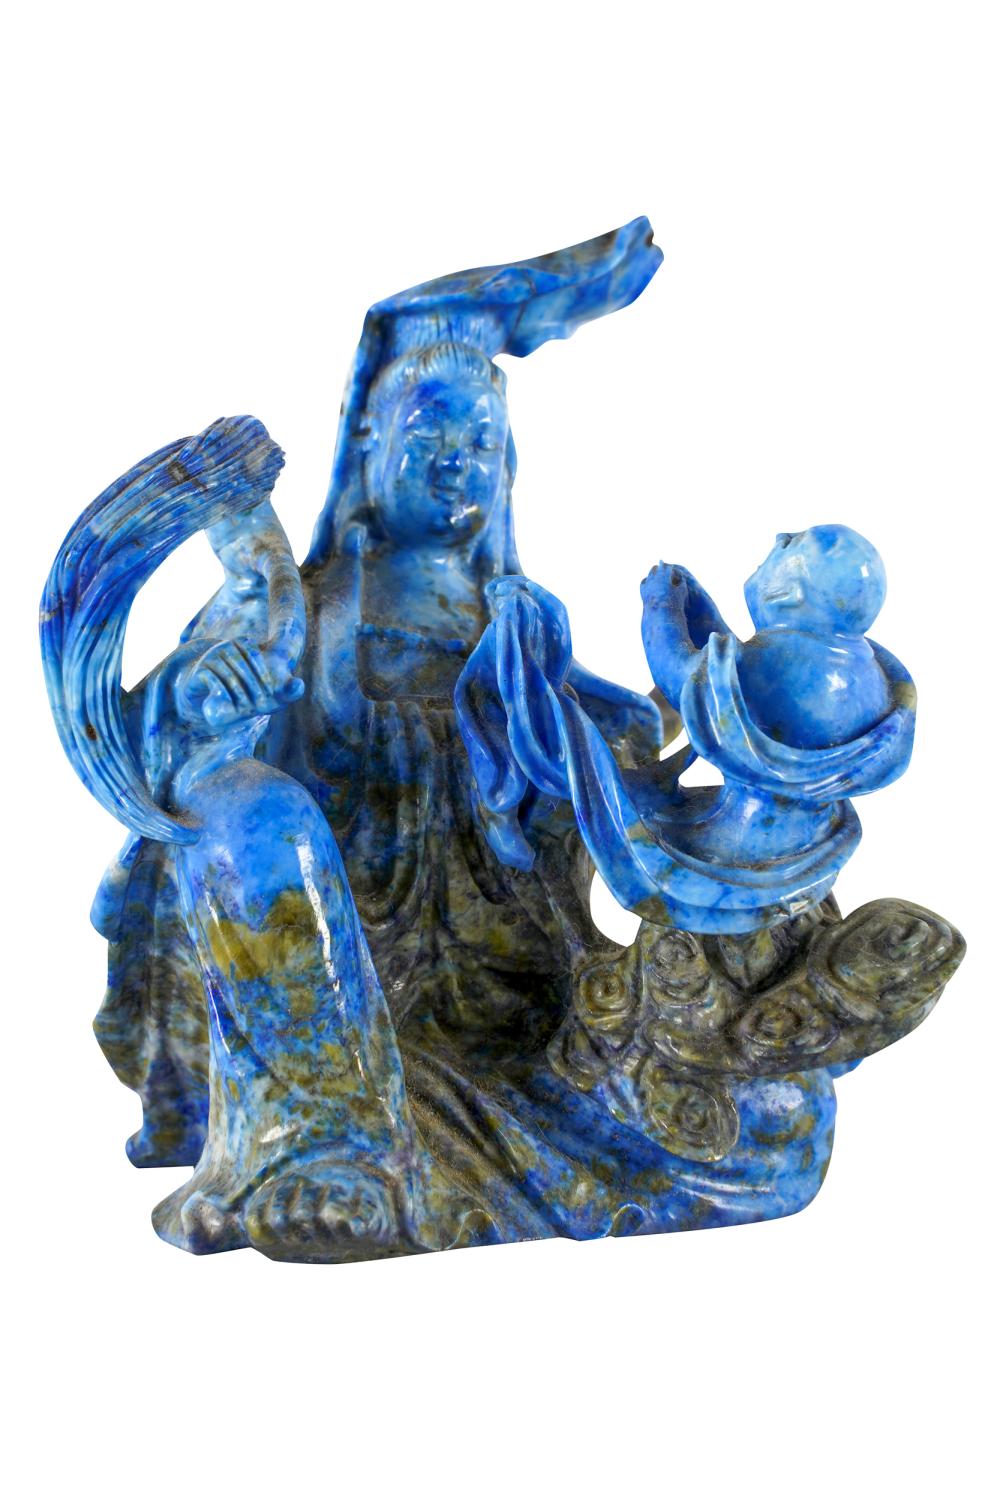 CHINESE CARVED LAPIS FIGURECondition: